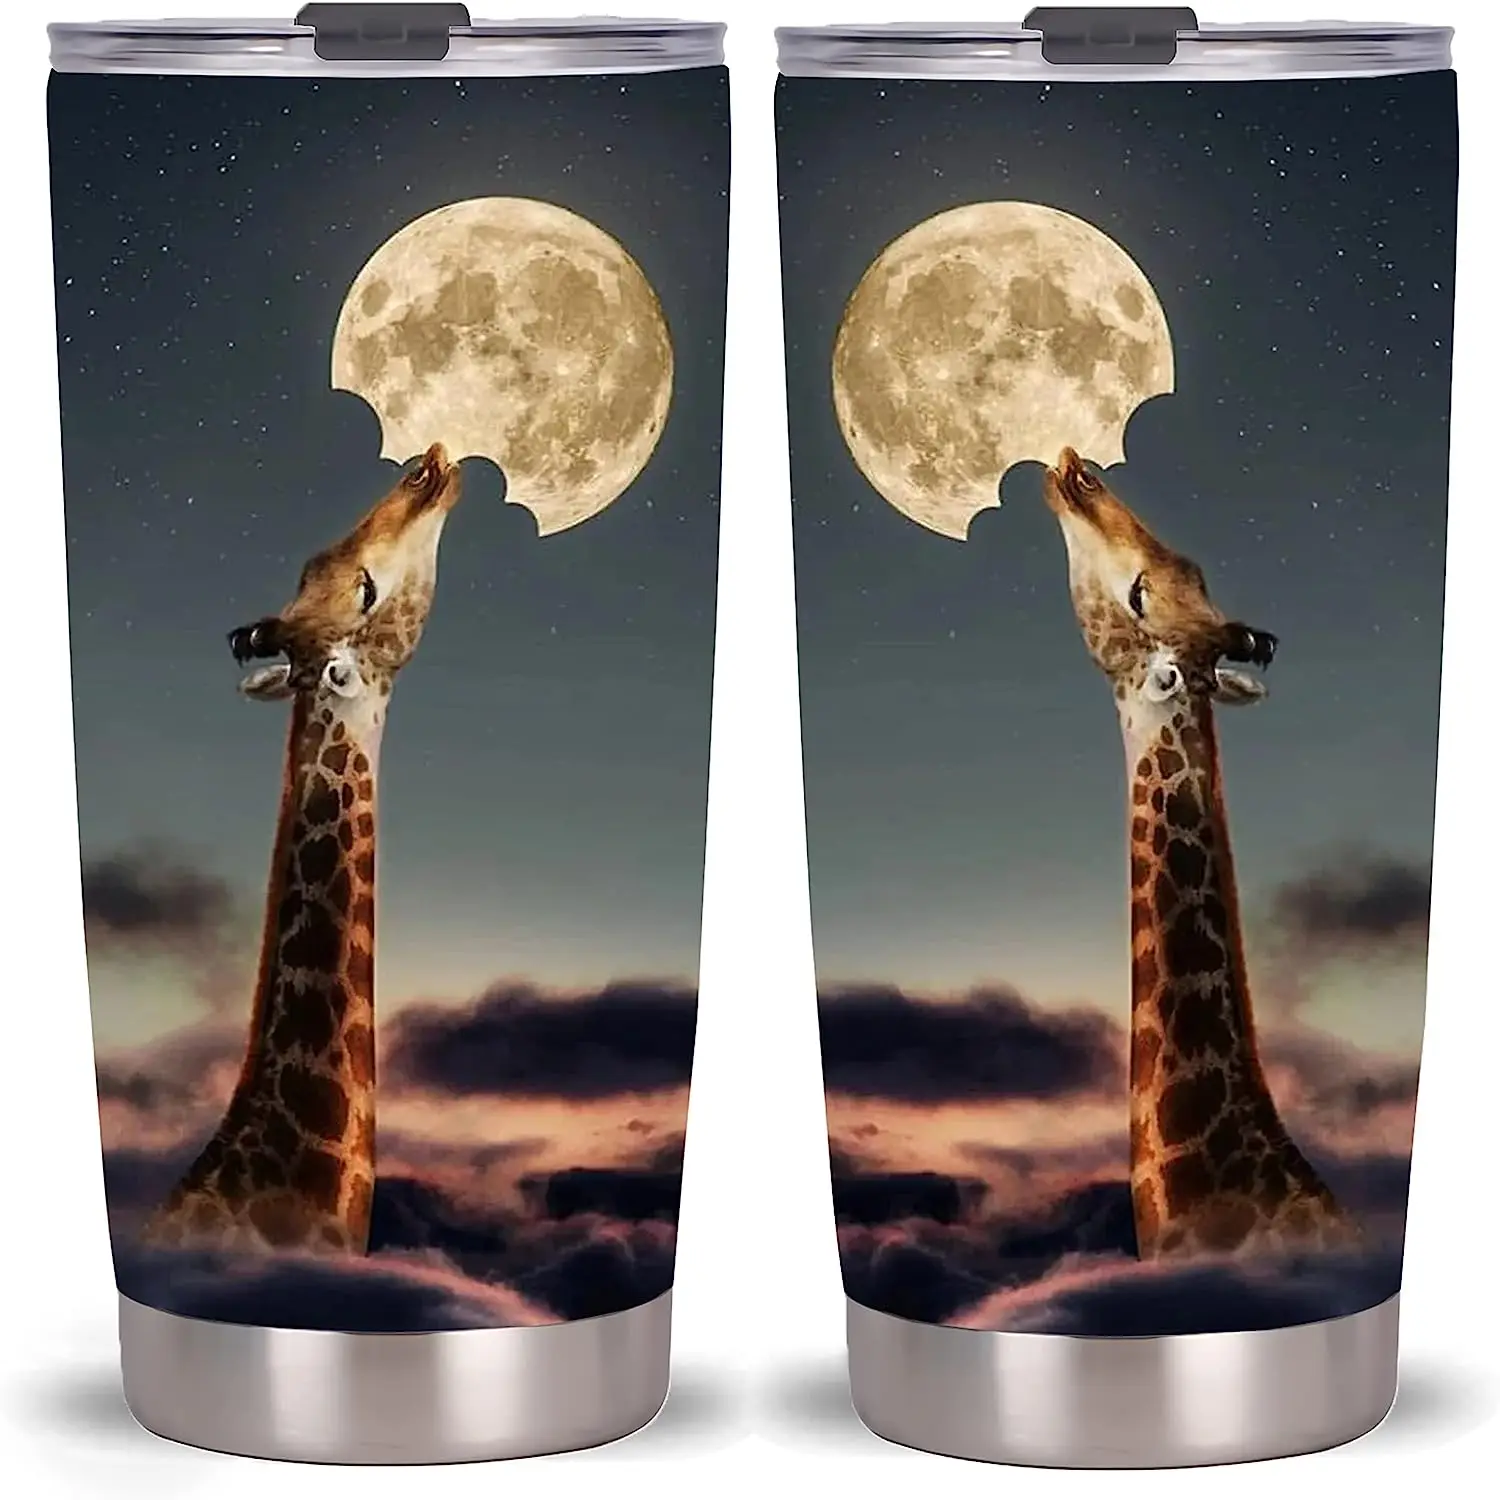 https://ae01.alicdn.com/kf/S56990c6a605a4a76b699144eafe75f77h/Giraffe-Wild-Animals-Pattern-Tumbler-Travel-Cup-Double-Wall-Vacuum-Insulated-Thermos-with-Lid-20oz-Mug.jpg